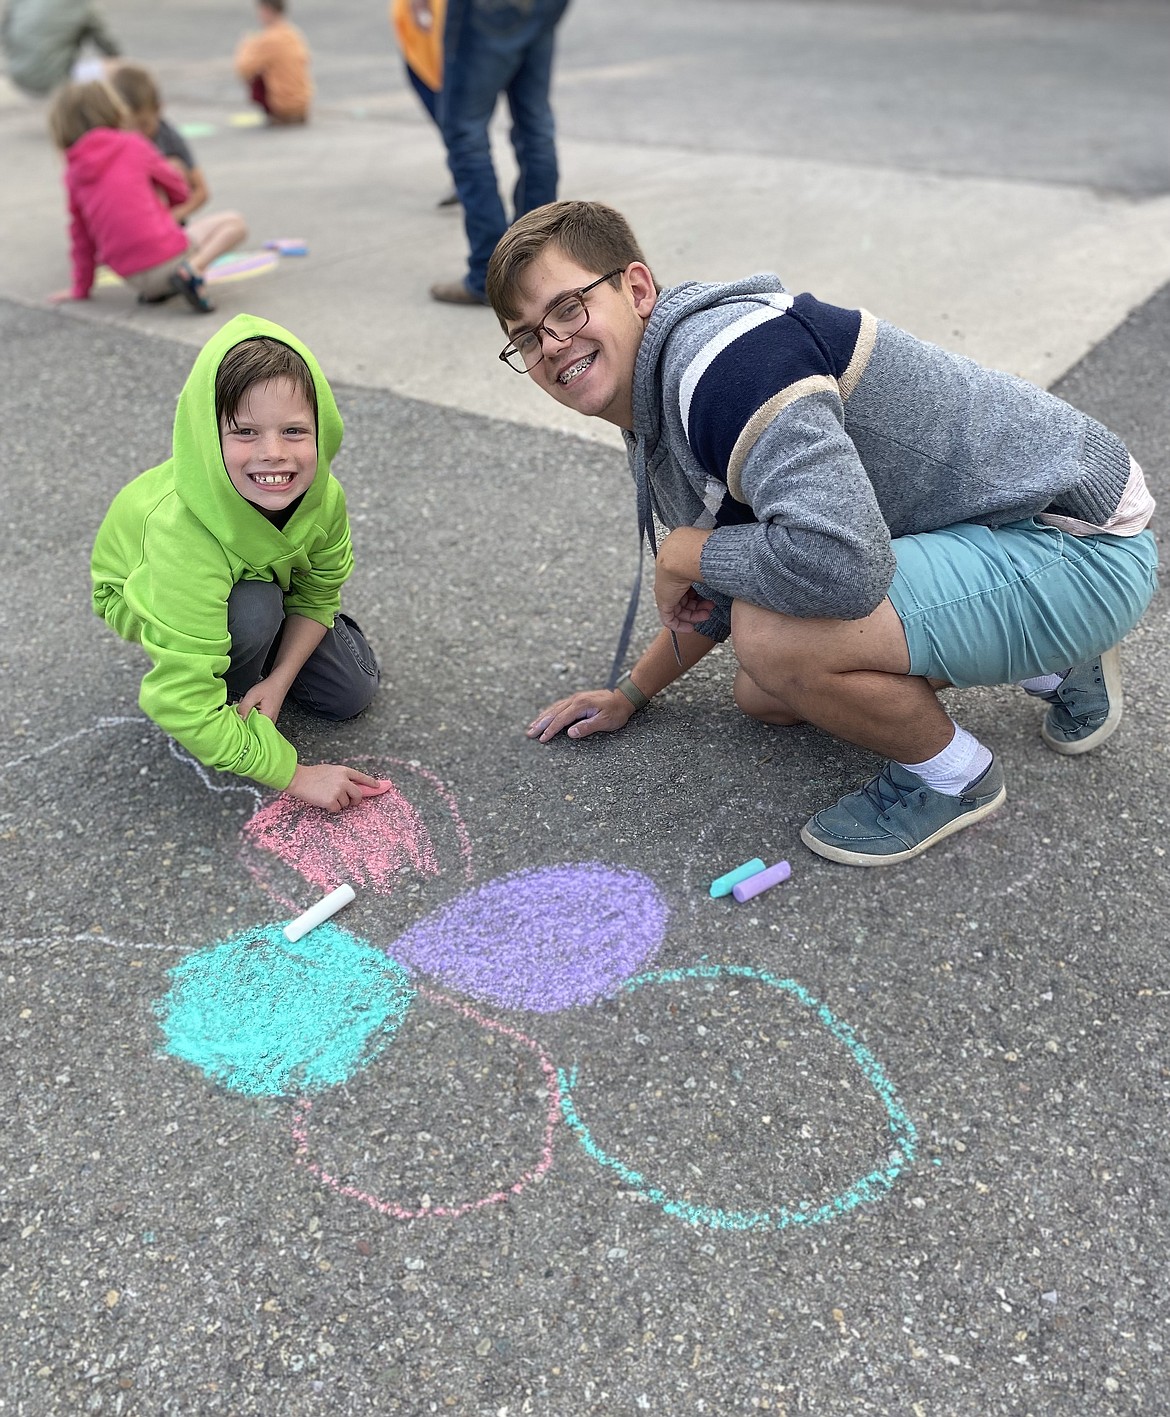 Flathead High School graduate Jacob Fort spends time with his first-grade Learn and Serve buddy Wesley Achziger. Learn and Serve was one of several mentor/service activities Fort was involved in during his high school career. (Photo provided by Flathead High School)